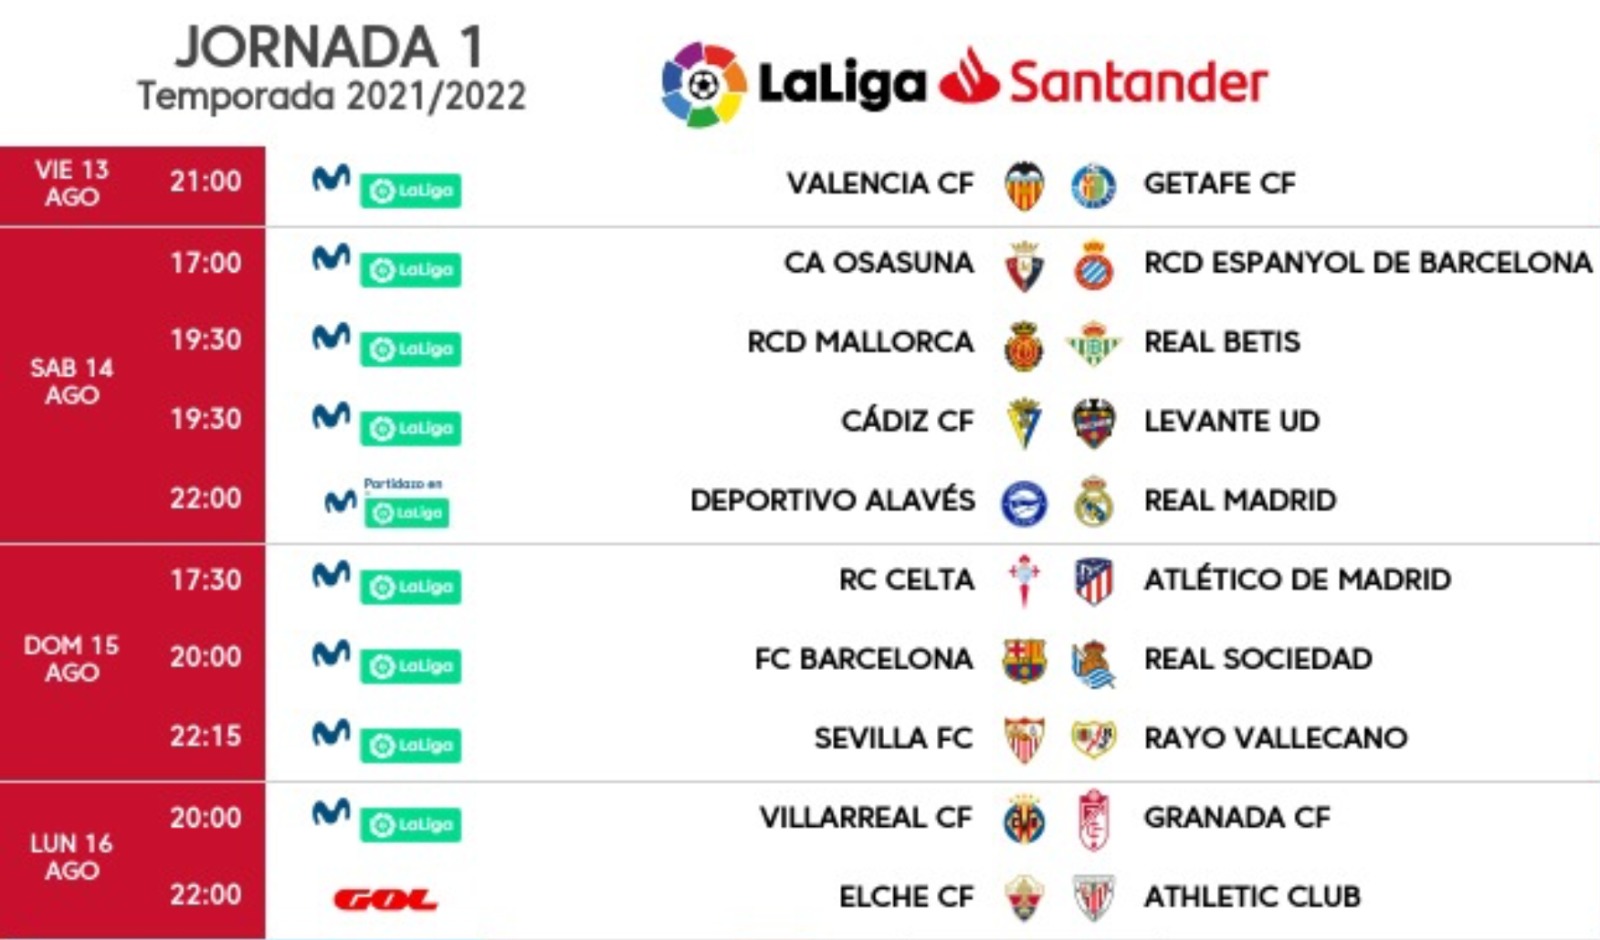 Schedule for the first day of La Liga